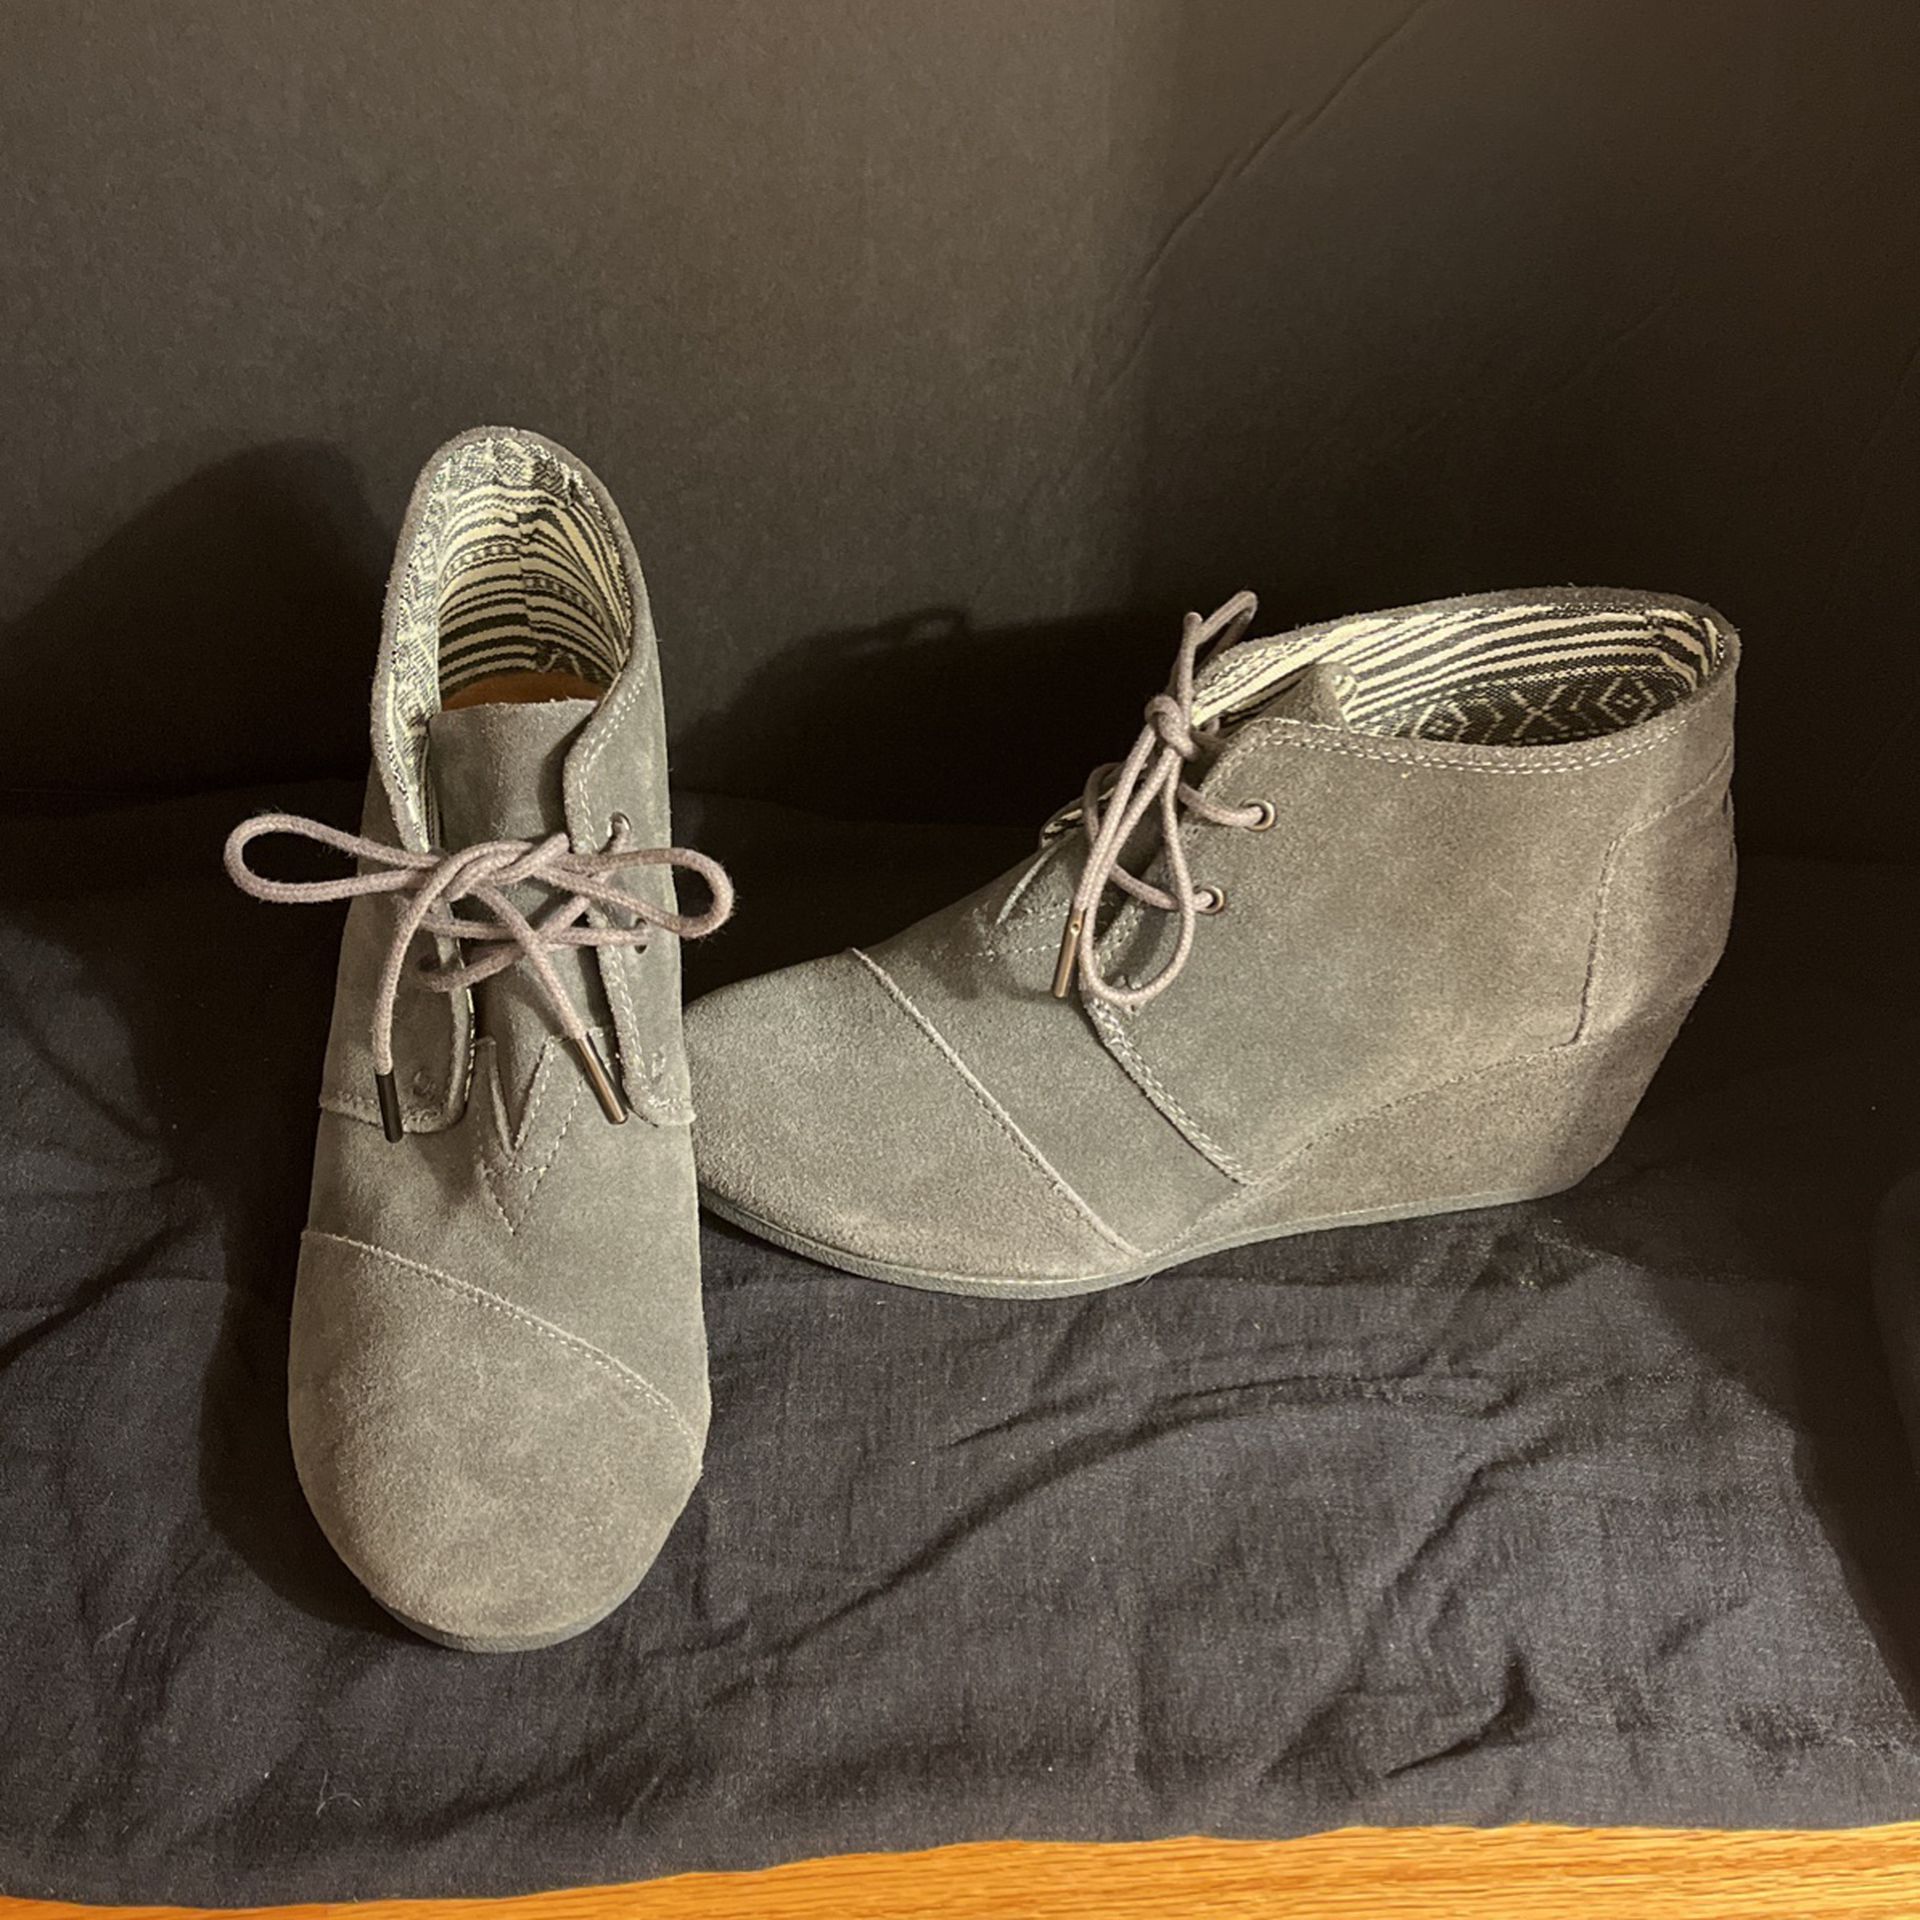 TOMS Gray Suede Wedge Boot-Women’s Size 8.5